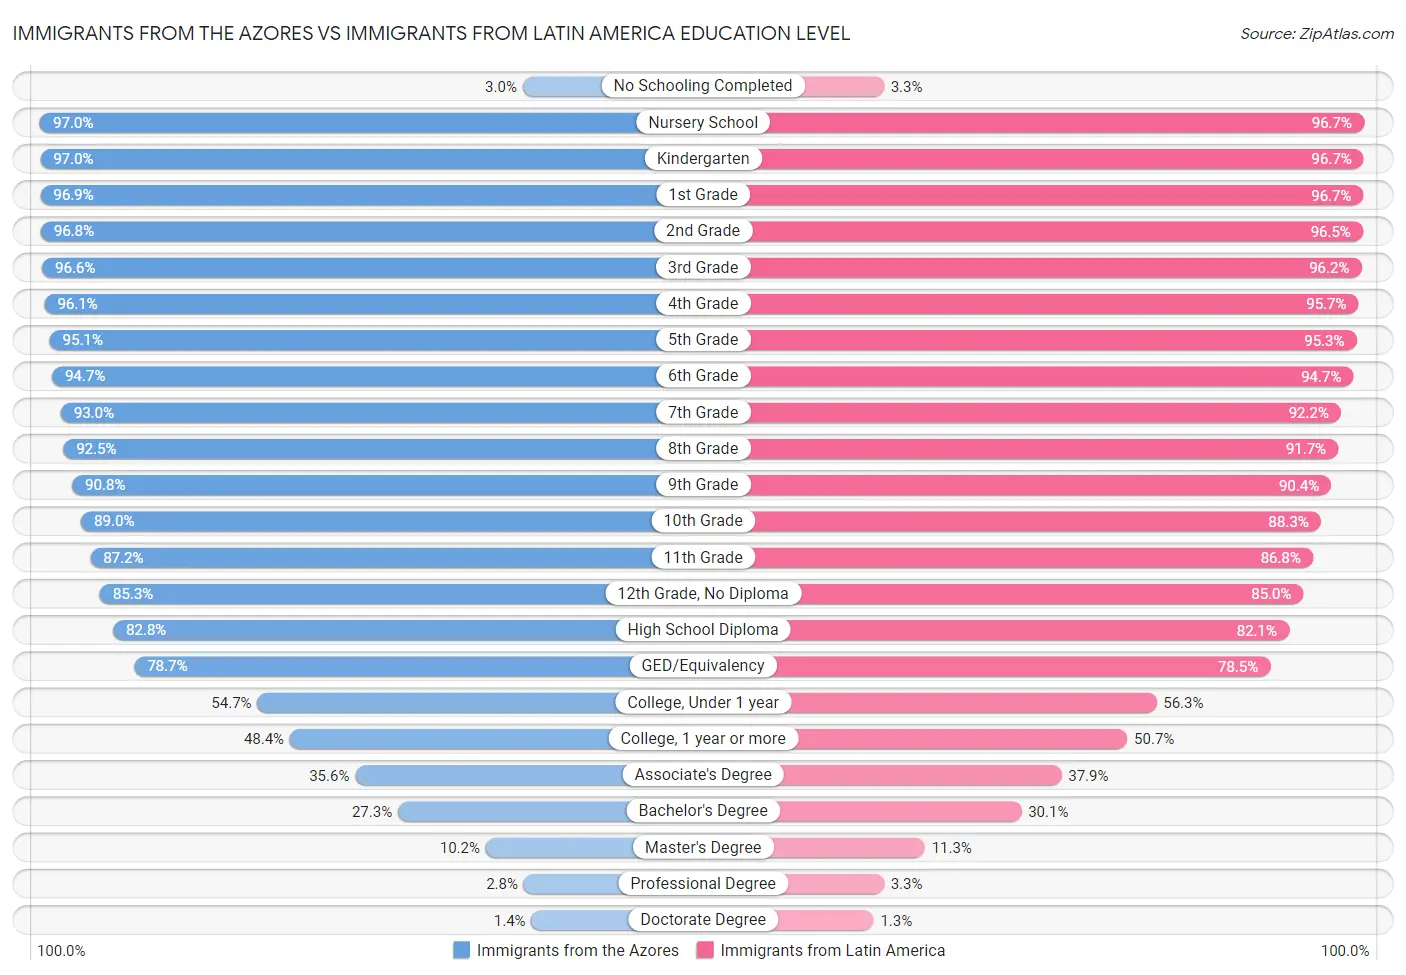 Immigrants from the Azores vs Immigrants from Latin America Education Level